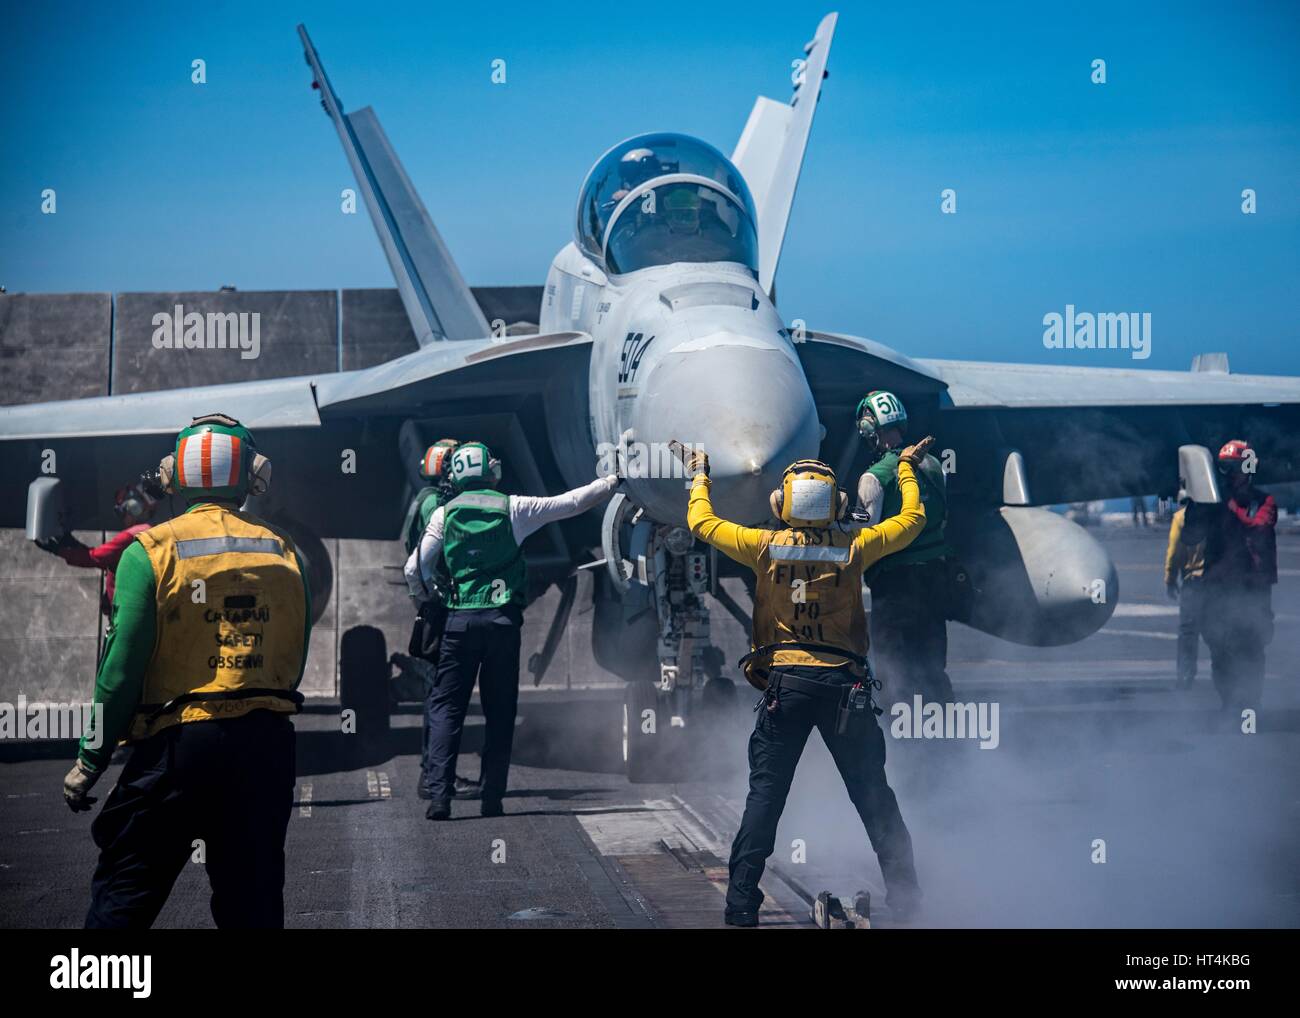 U.S. sailors prepare a U.S. Navy F/A-18F Super Hornet fighter aircraft for launch from the flight deck aboard the USN Nimitz-class aircraft carrier USS Carl Vinson February 22, 2017 in the South China Sea. Stock Photo